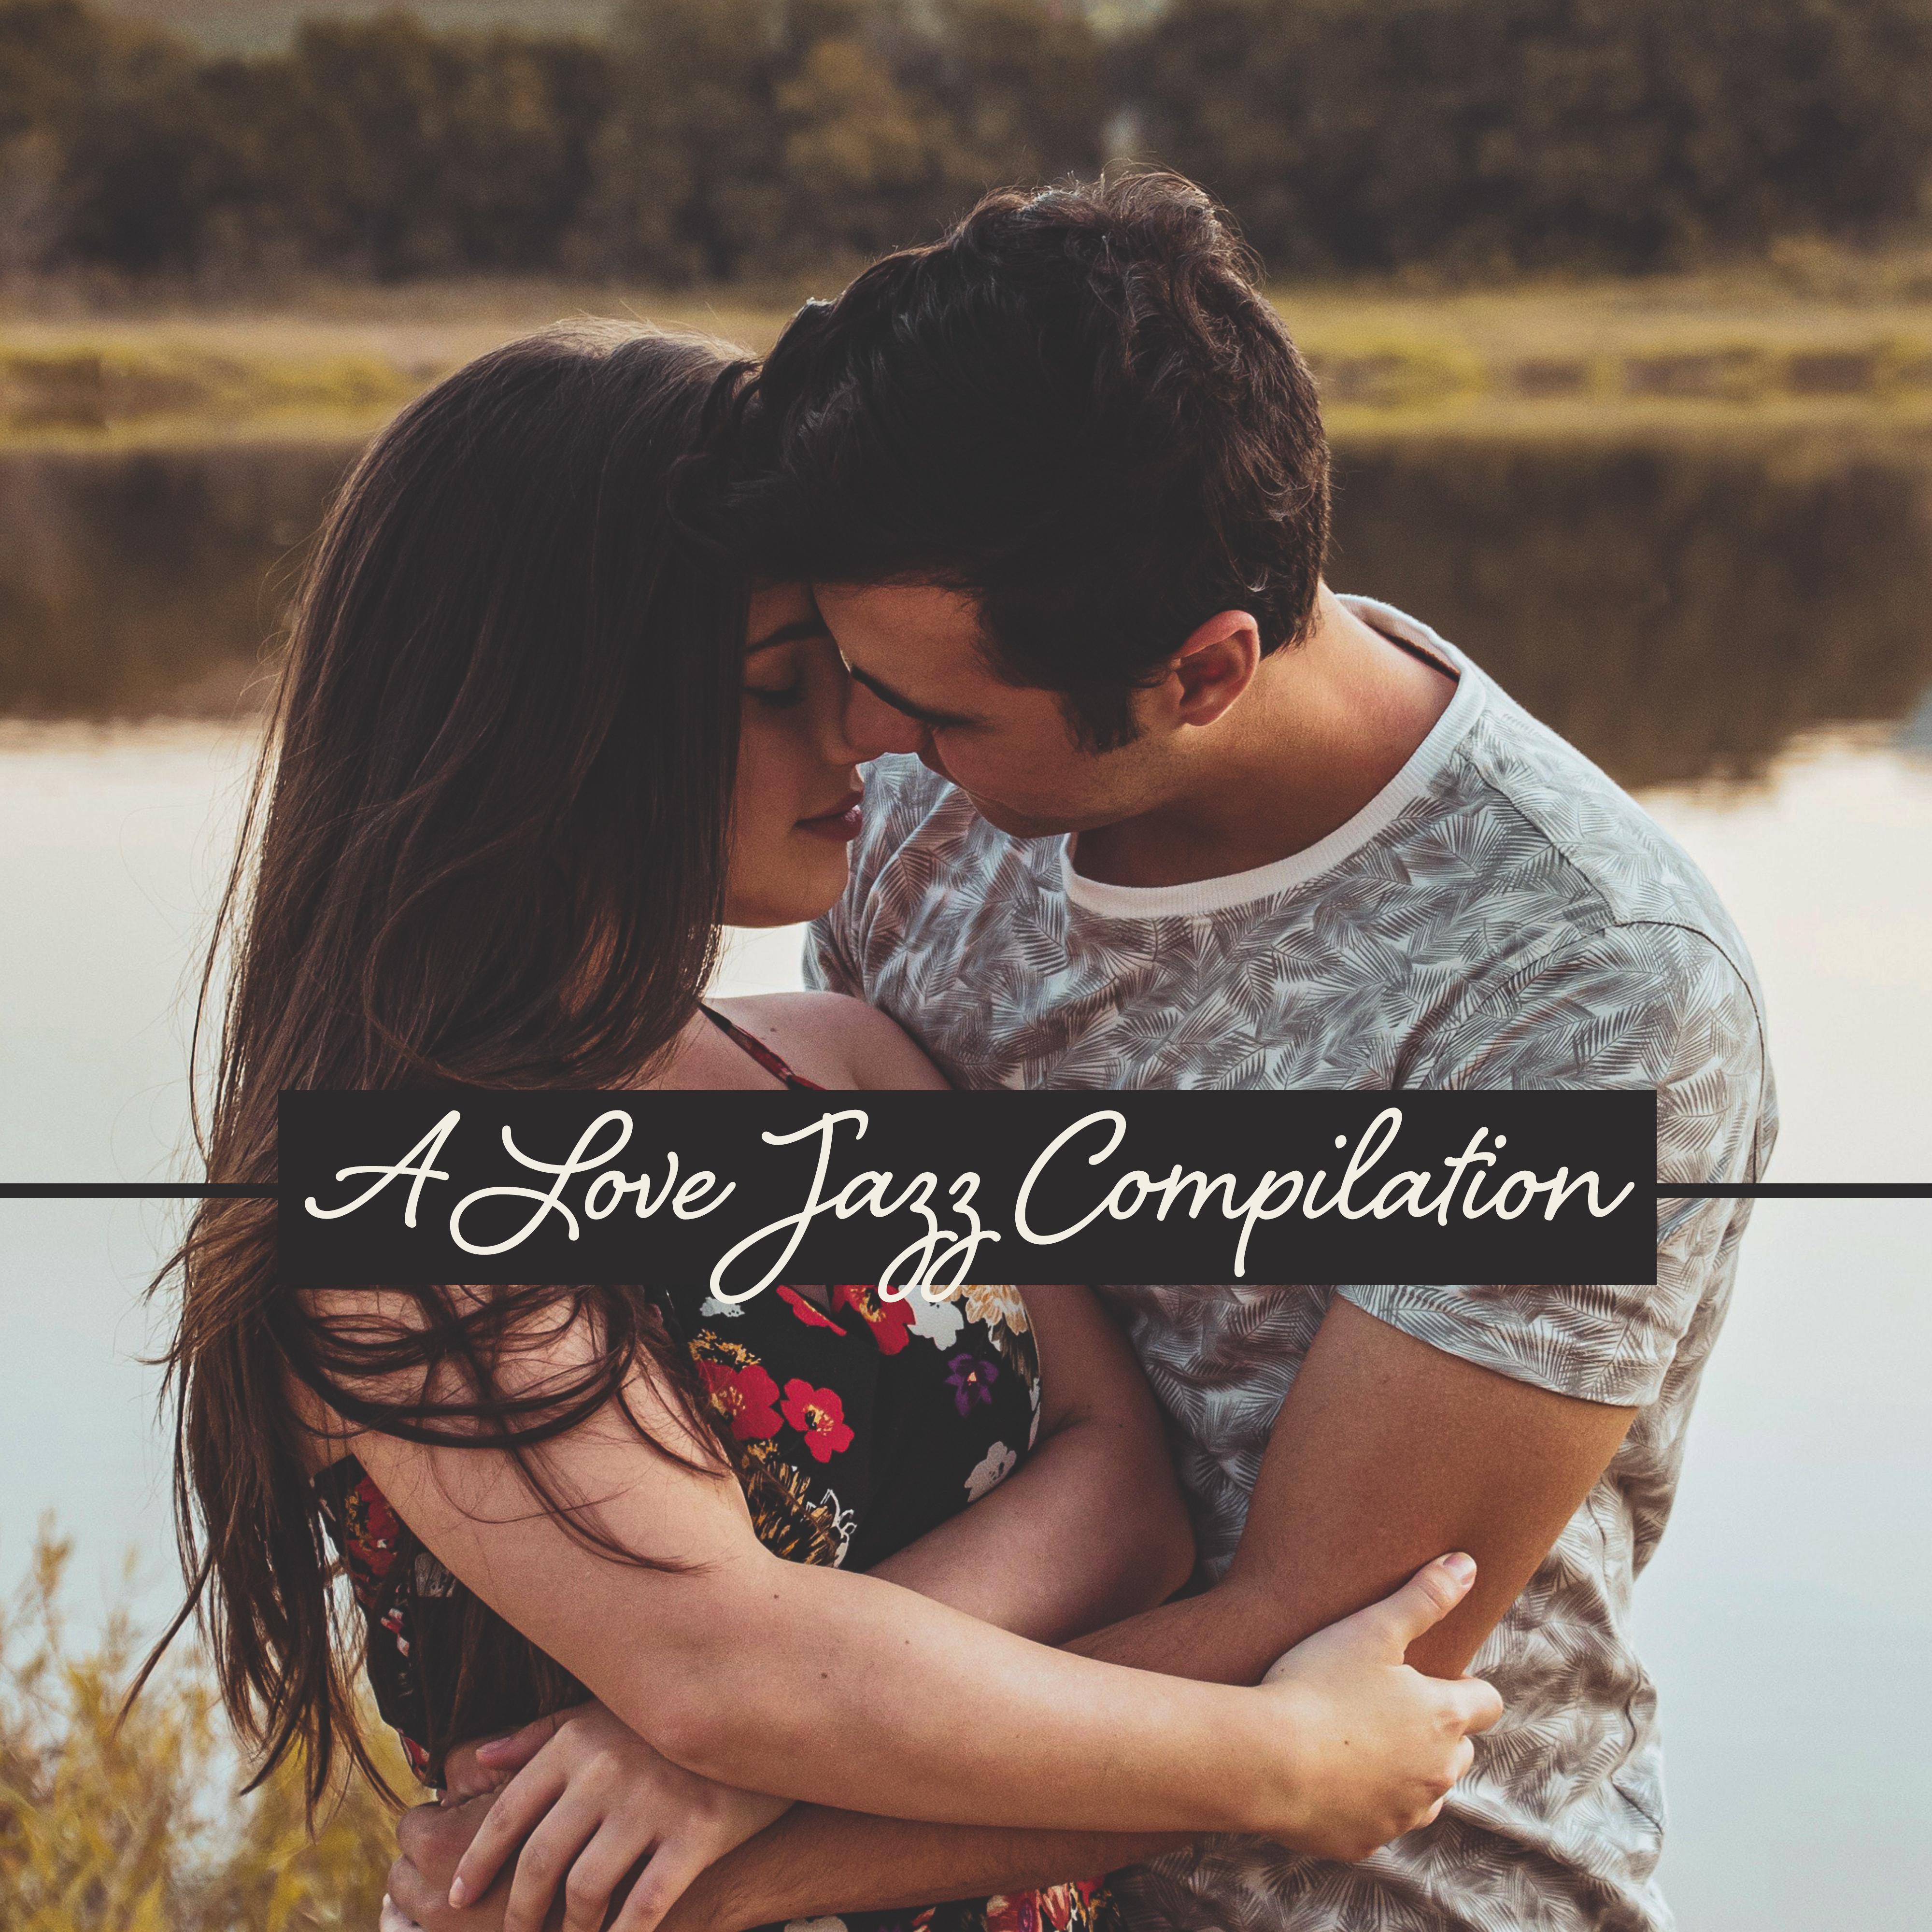 A Love Jazz Compilation: 2019 Romantic Instrumental Smooth Jazz Music Album, Background Sounds of Couple' s Dinner and Intimate Moments at Home, Vintage Styled Music Played on Piano, Contrabass, Sax  More